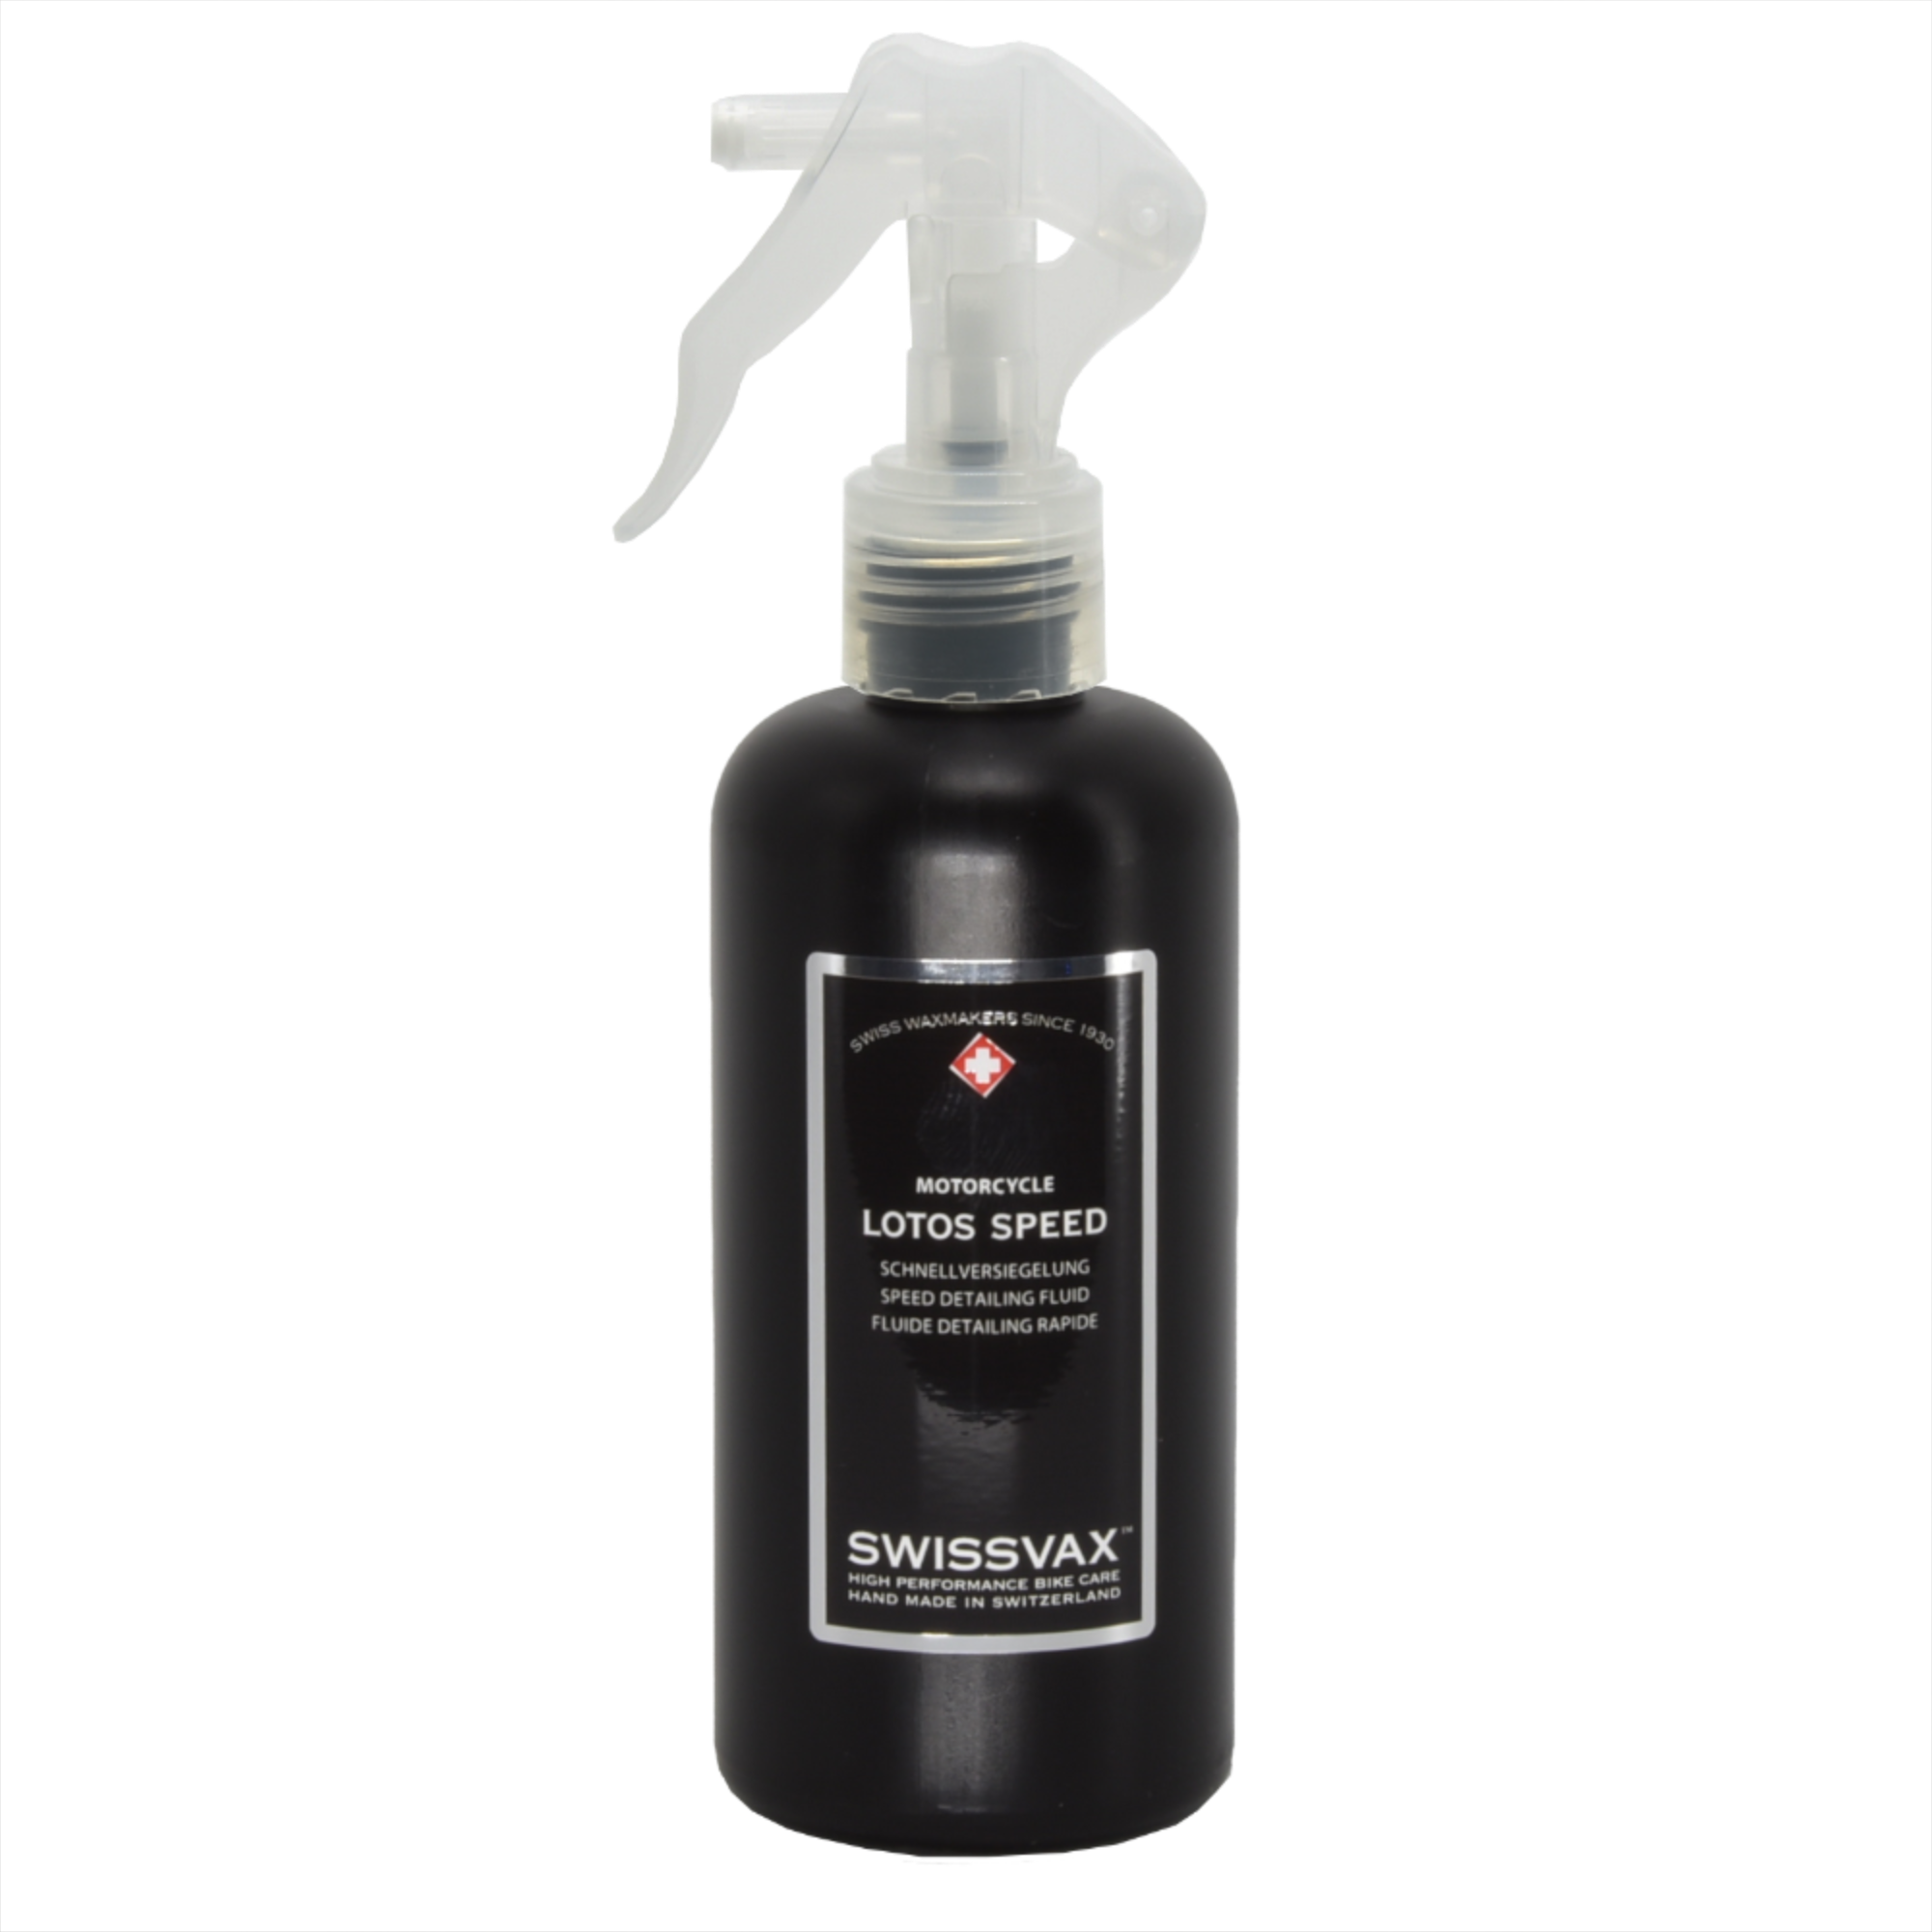 Swissvax Motorcycle LOTOS SPEED Spray sealant for all surfaces